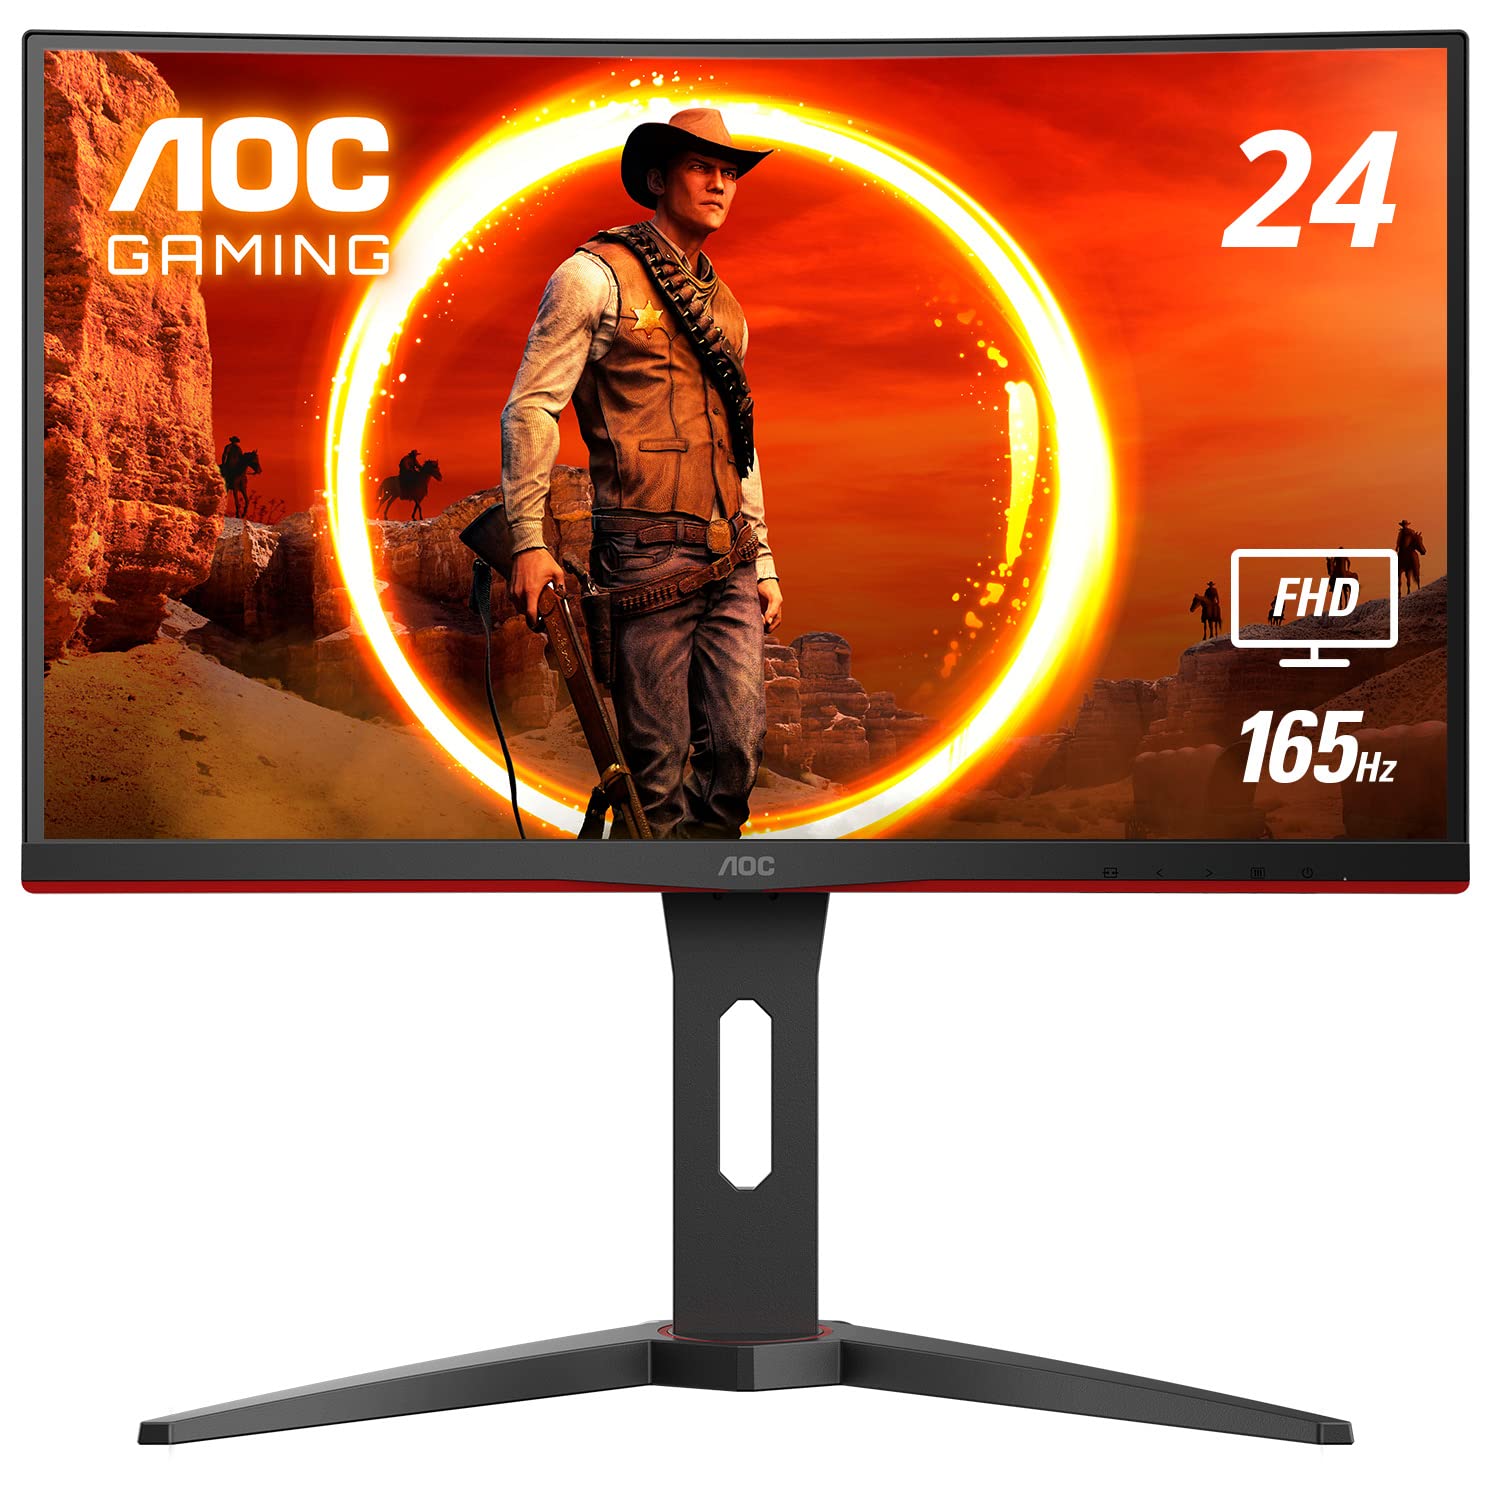 24" AOC C24G1A 1080p VA 165Hz 1500R Curved Gaming Monitor $120 + Free Shipping